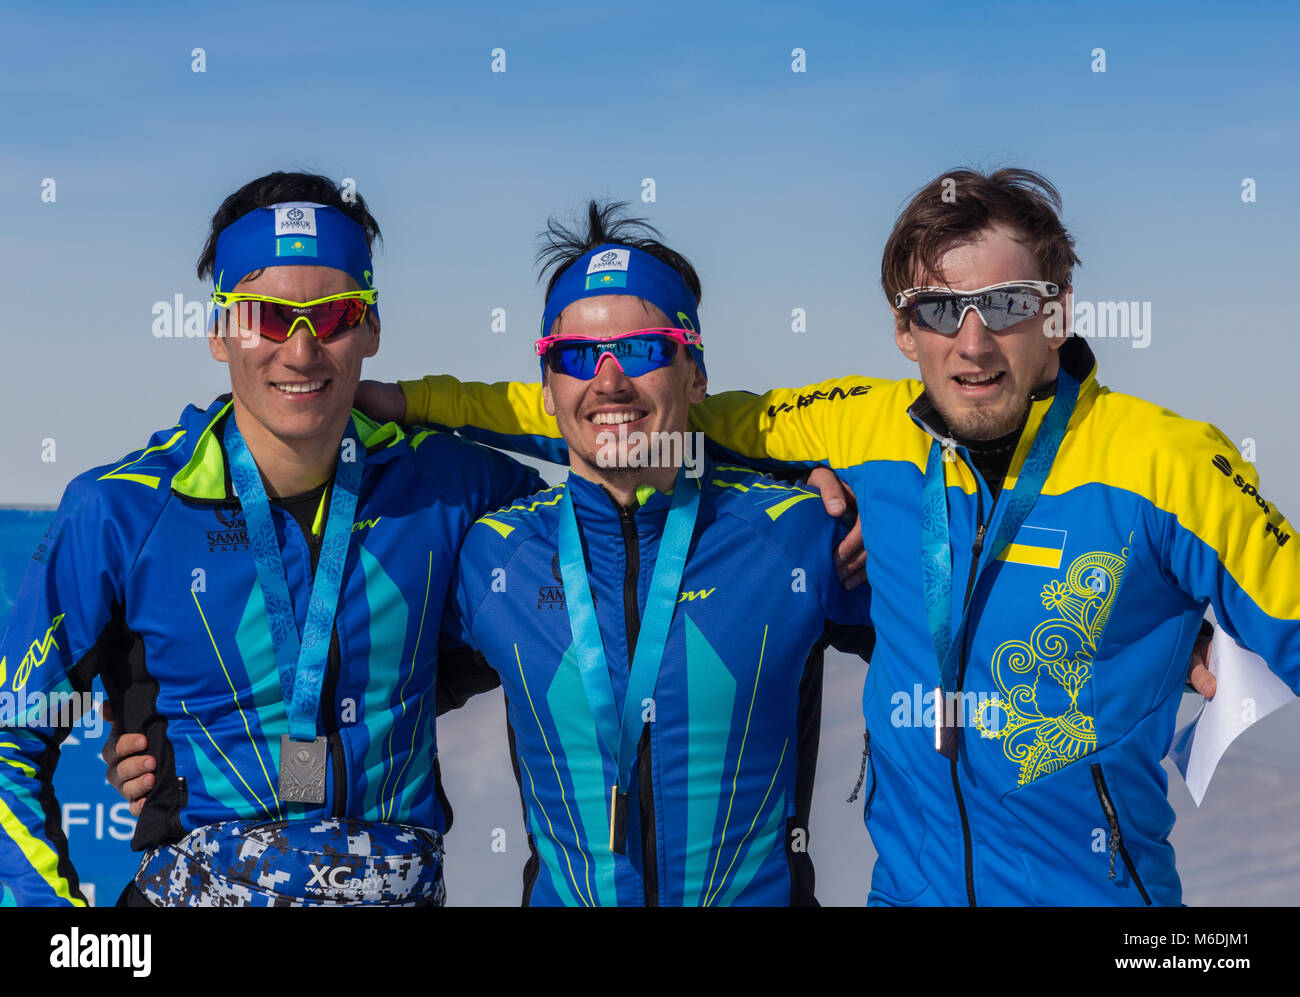 KAZAKHSTAN, ALMATY - FEBRUARY 25, 2018: Amateur cross-country skiing competitions of ARBA ski fest 2018. Participants from all over the republic compe Stock Photo